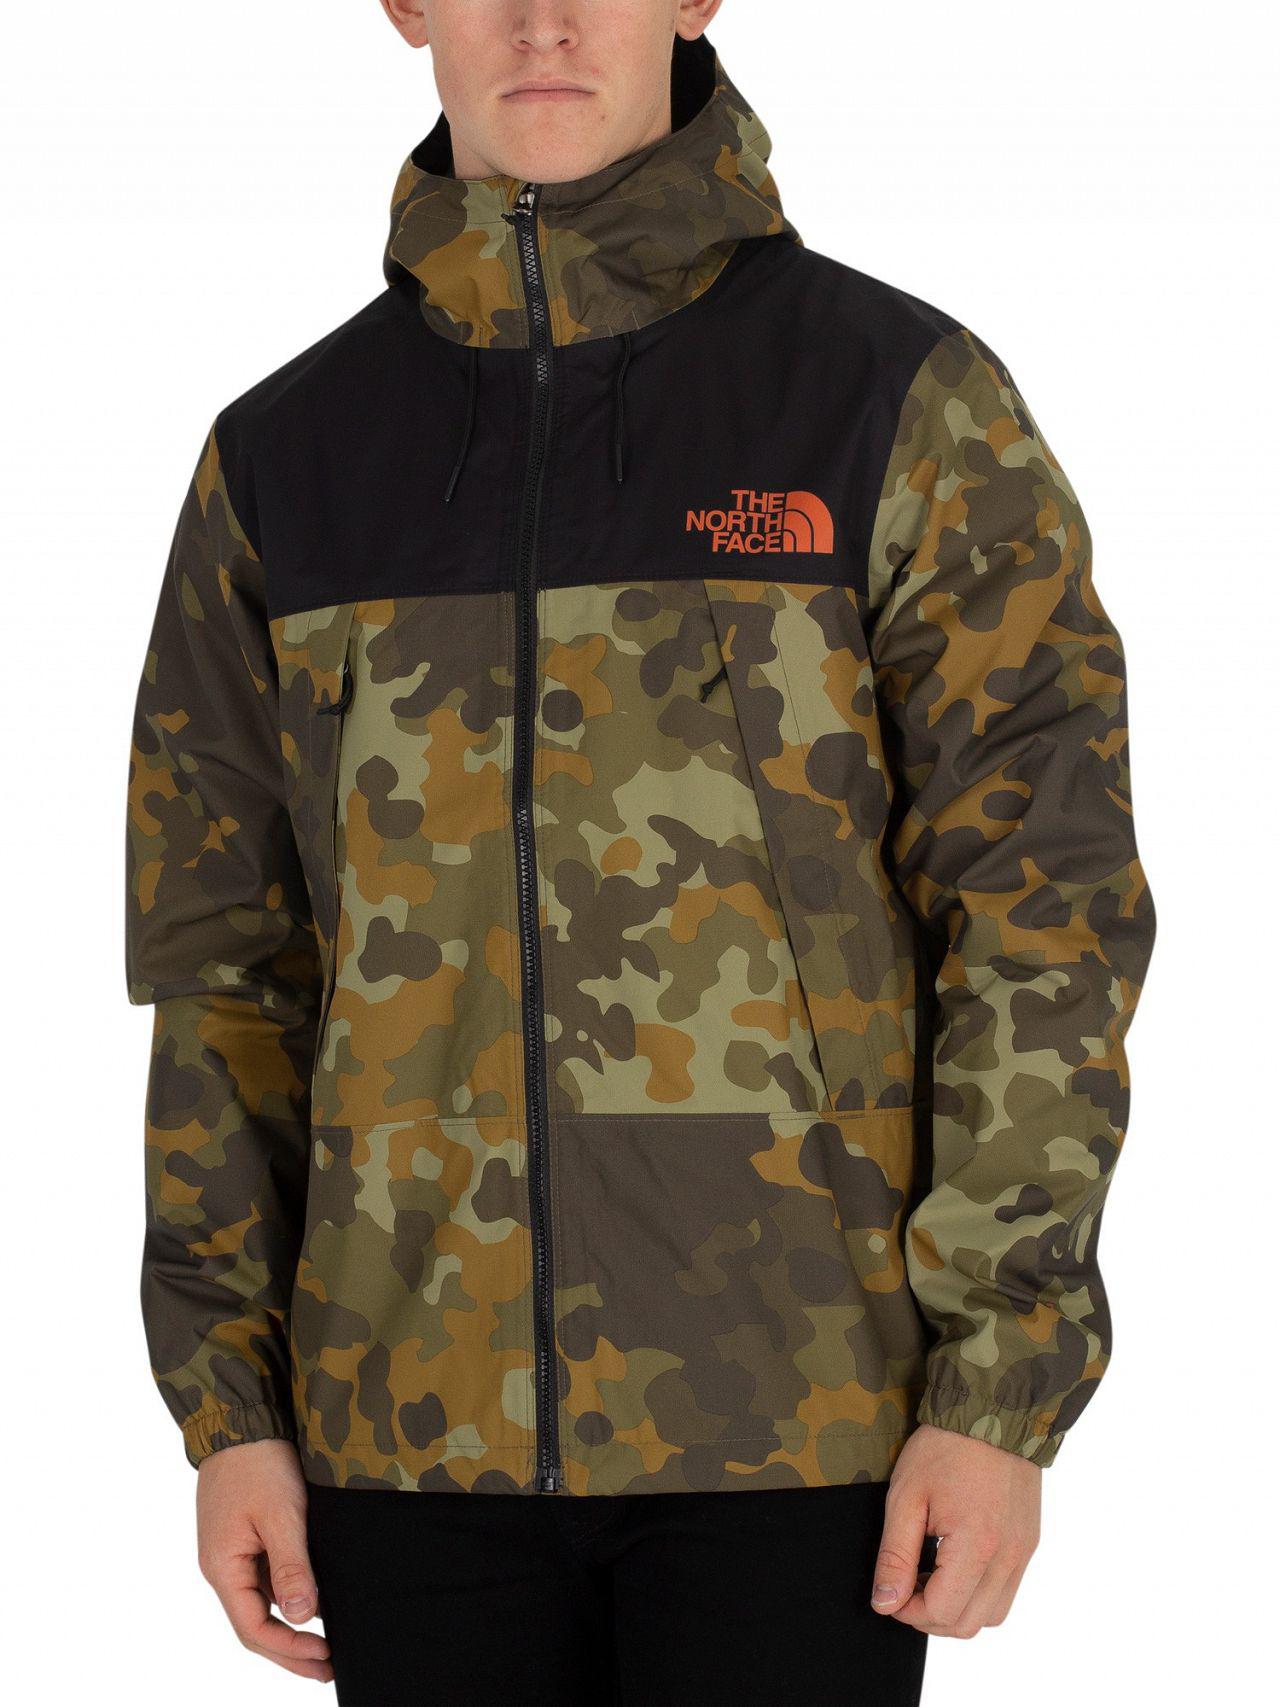 The North Face 1985 Mountain Fly Jacket White Camo Flash Sales, 58% OFF |  www.activot.com.au